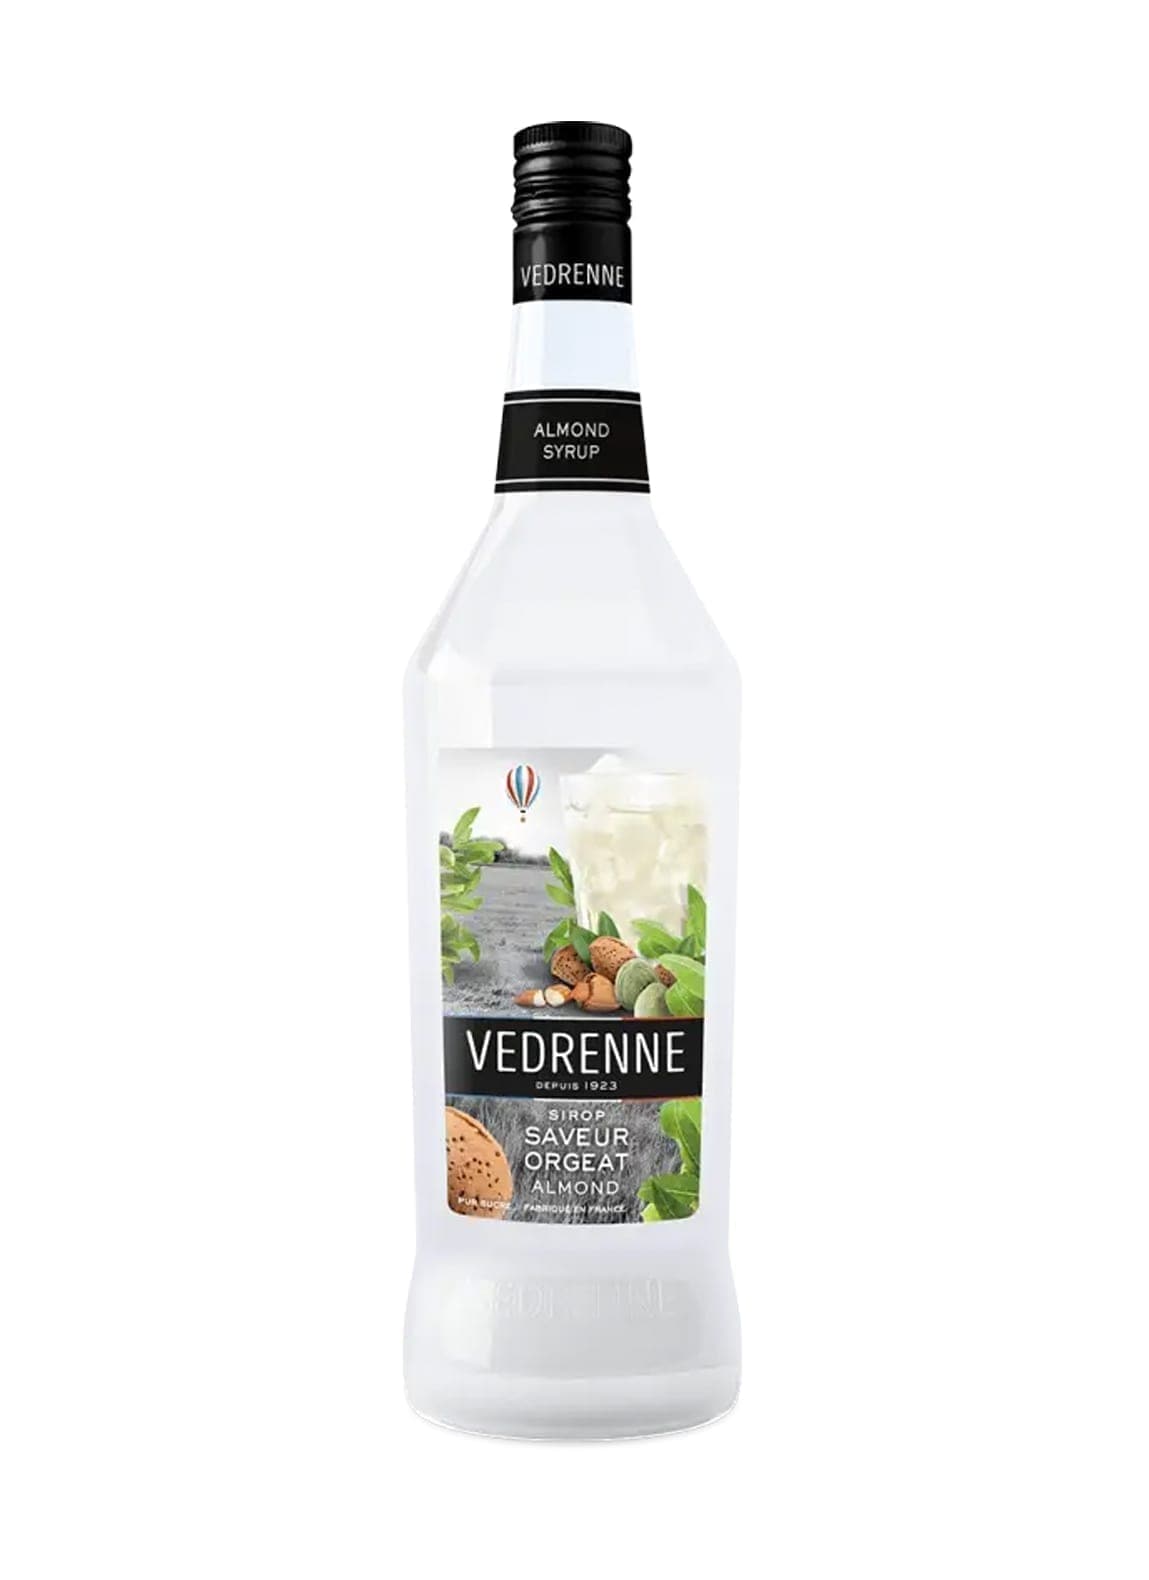 Vedrenne Sirop Orgeat (Almond cordial) 1000ml | Syrup | Shop online at Spirits of France